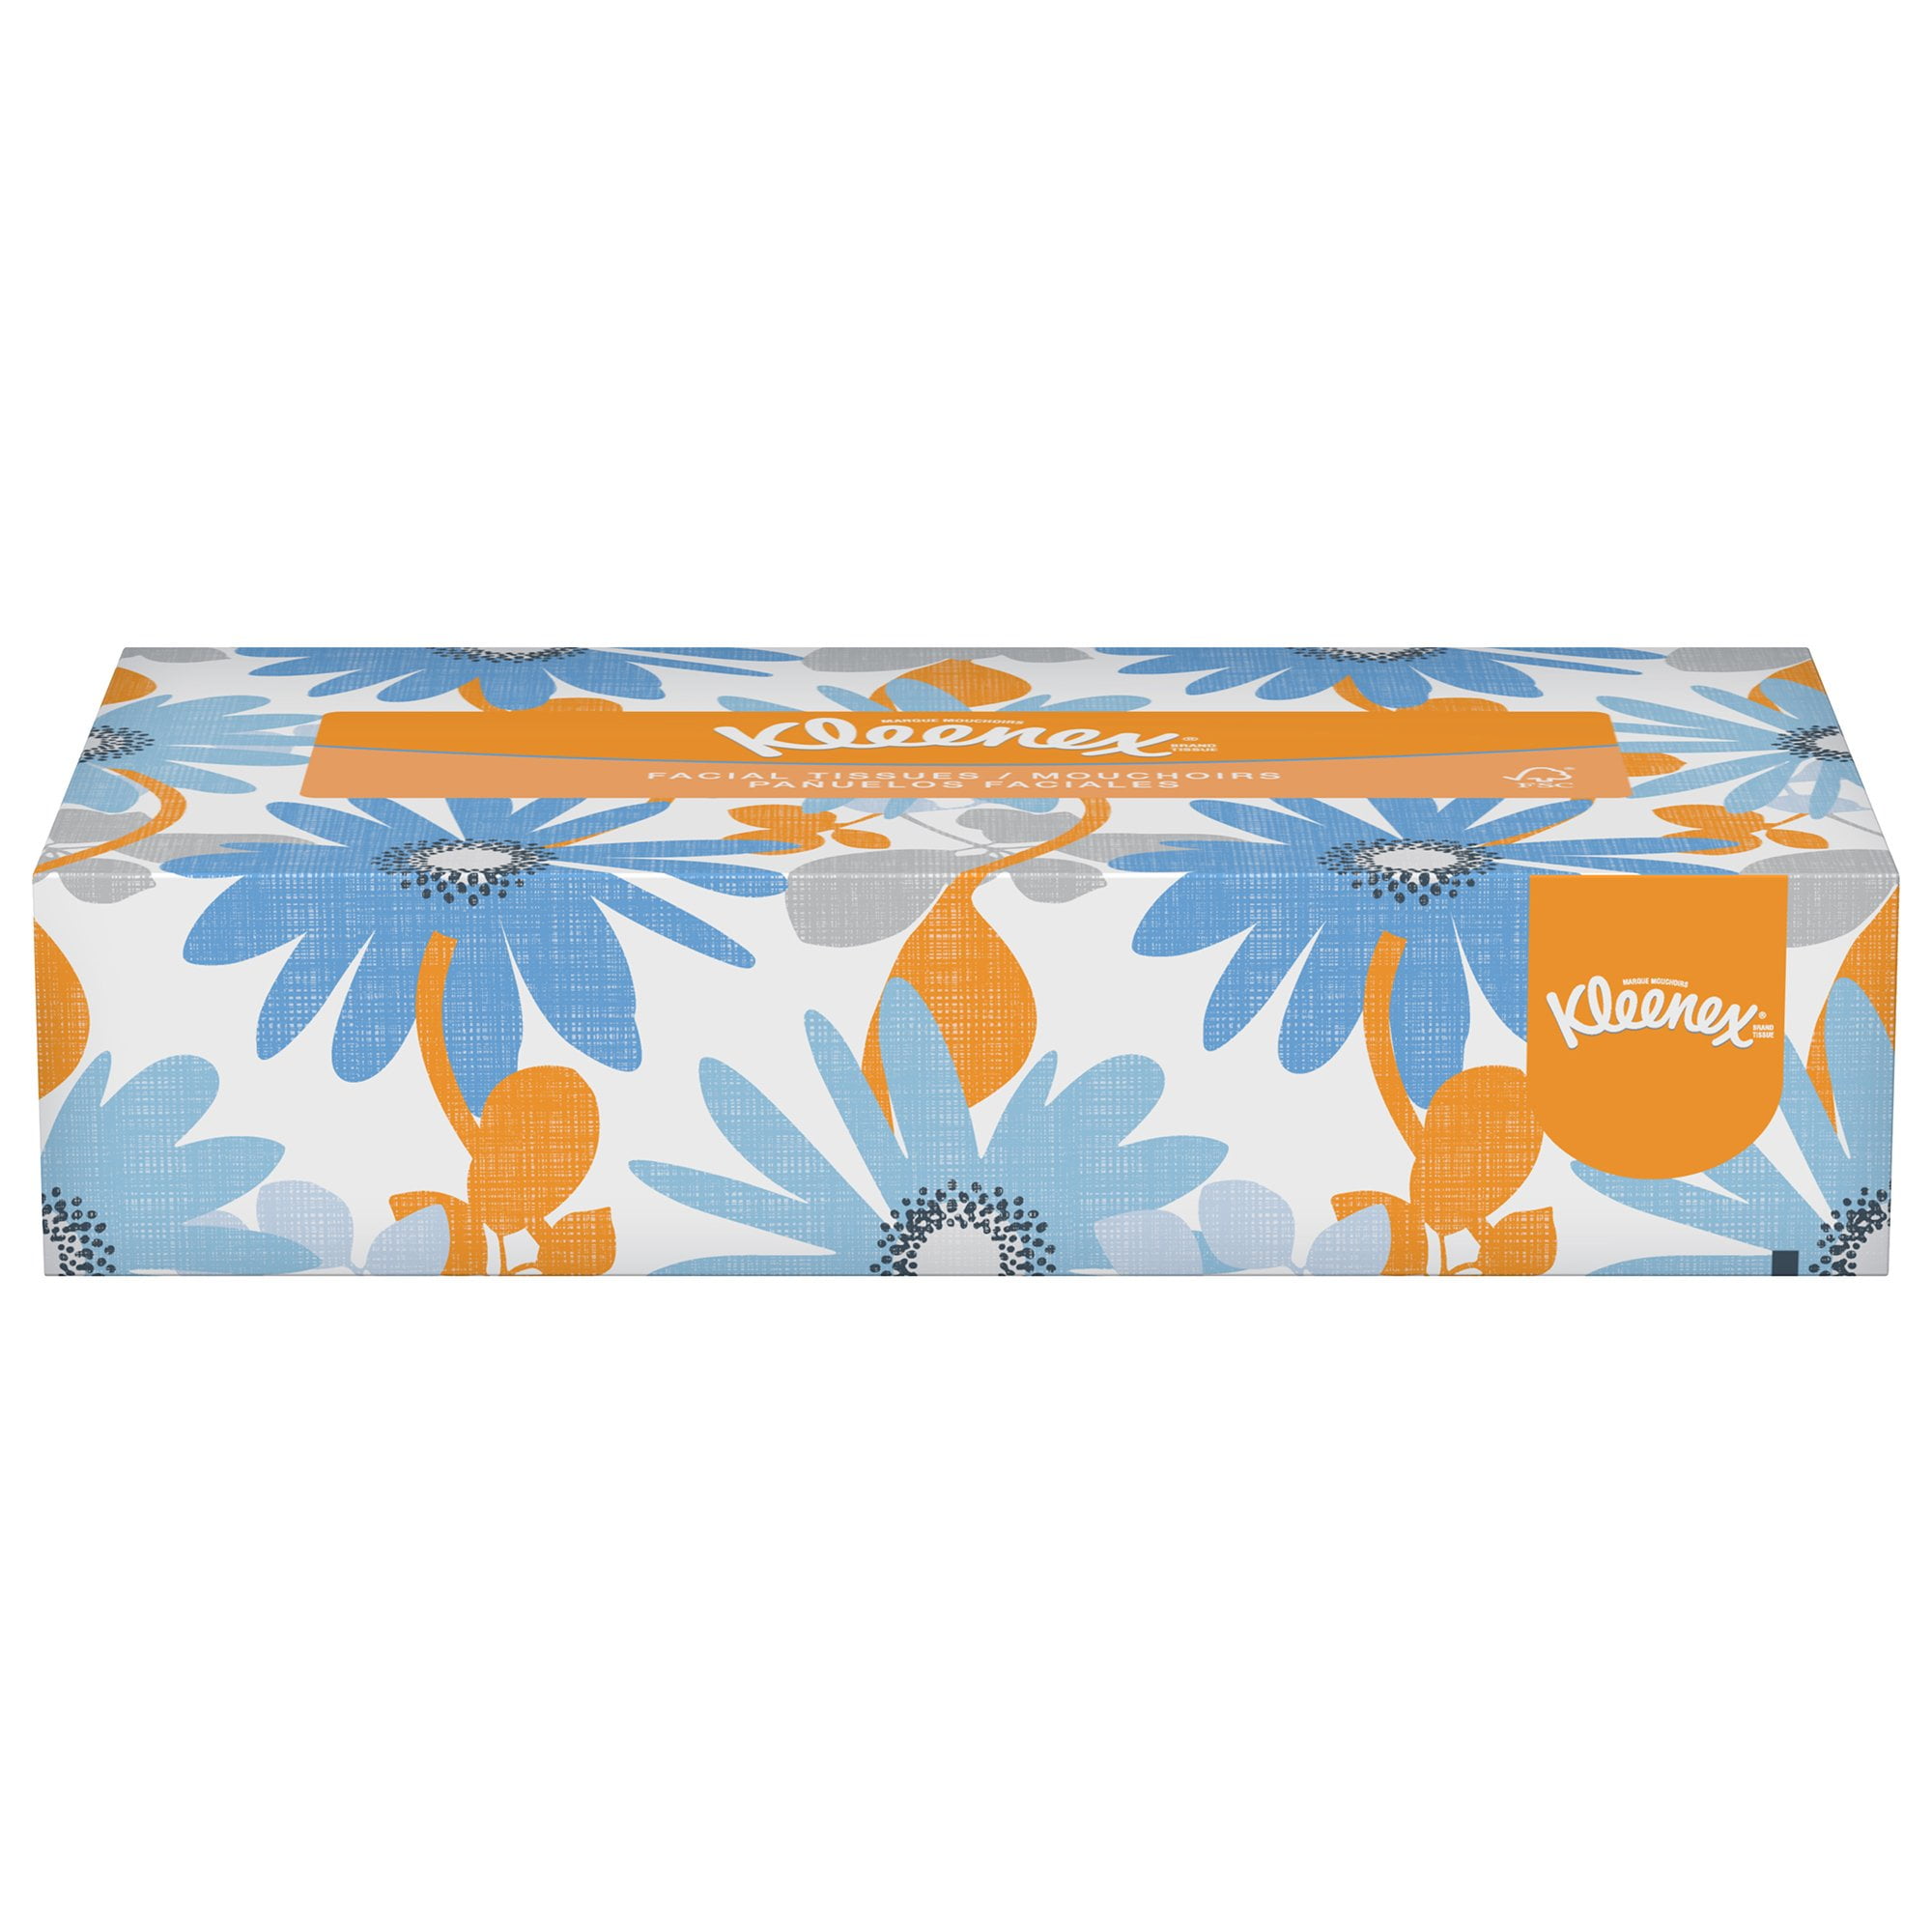 Flat Tissue Boxes 100 Tissues / Box 21400 Kleenex Professional Facial Tissue for Business 36 Boxes / Case 